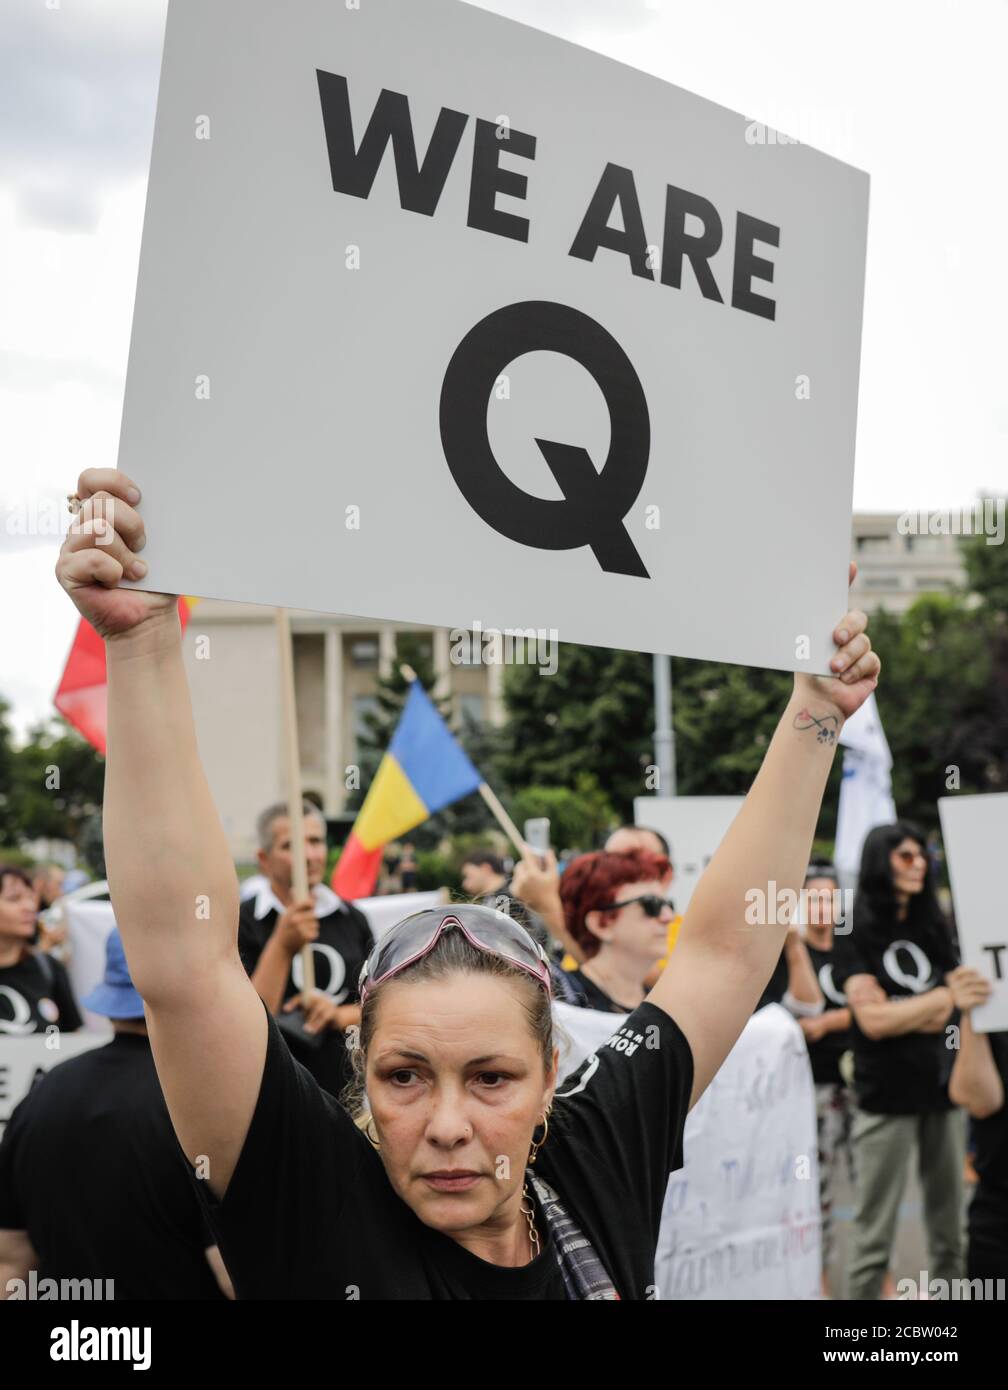 Bucharest, Romania - August 10, 2020: People display Qanon messages on cardboards during a political rally. Stock Photo